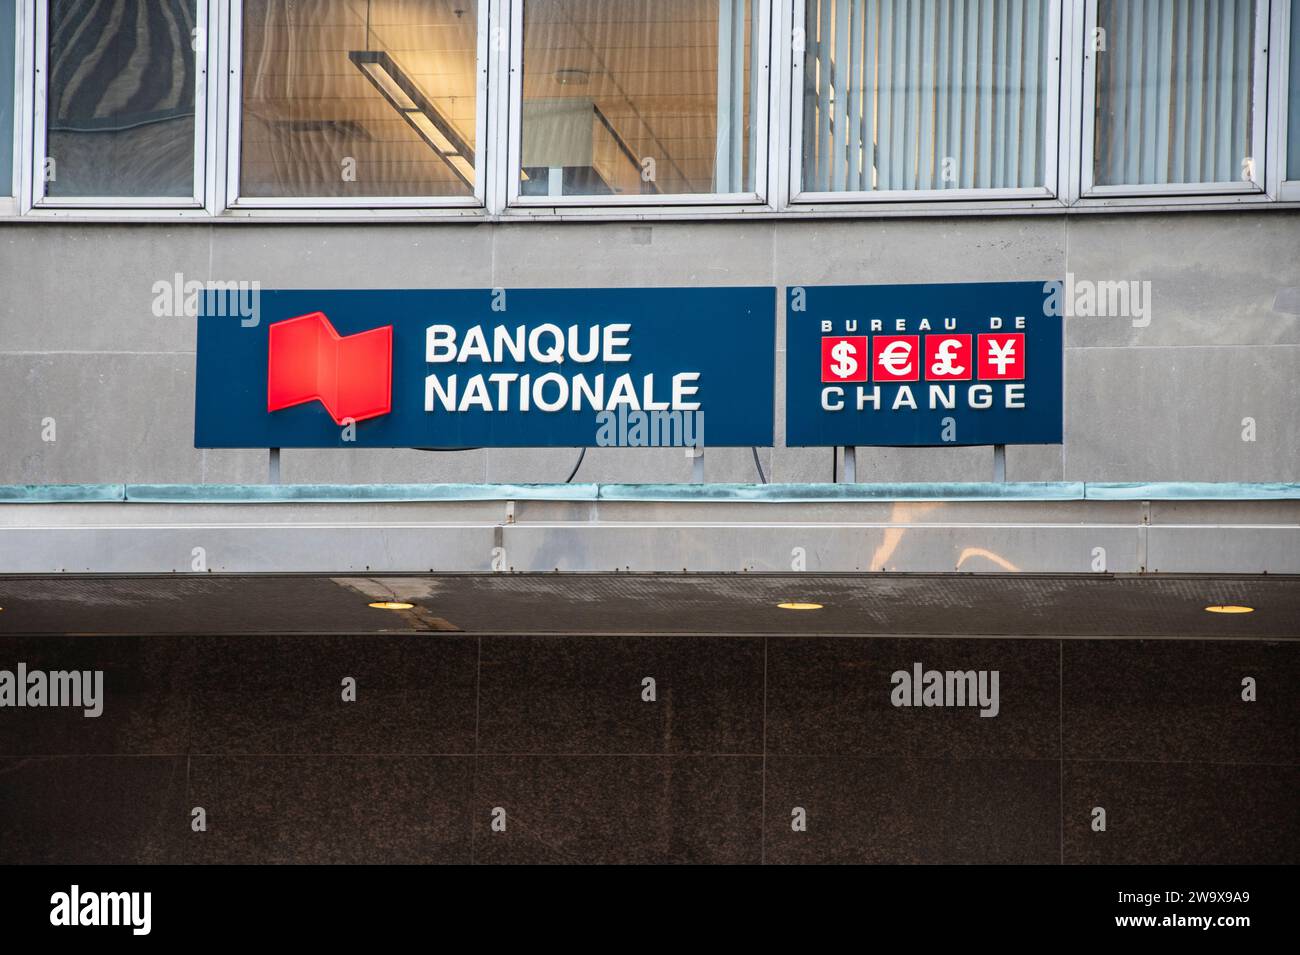 National Bank sign in French in downtown Montreal, Quebec, Canada Stock Photo